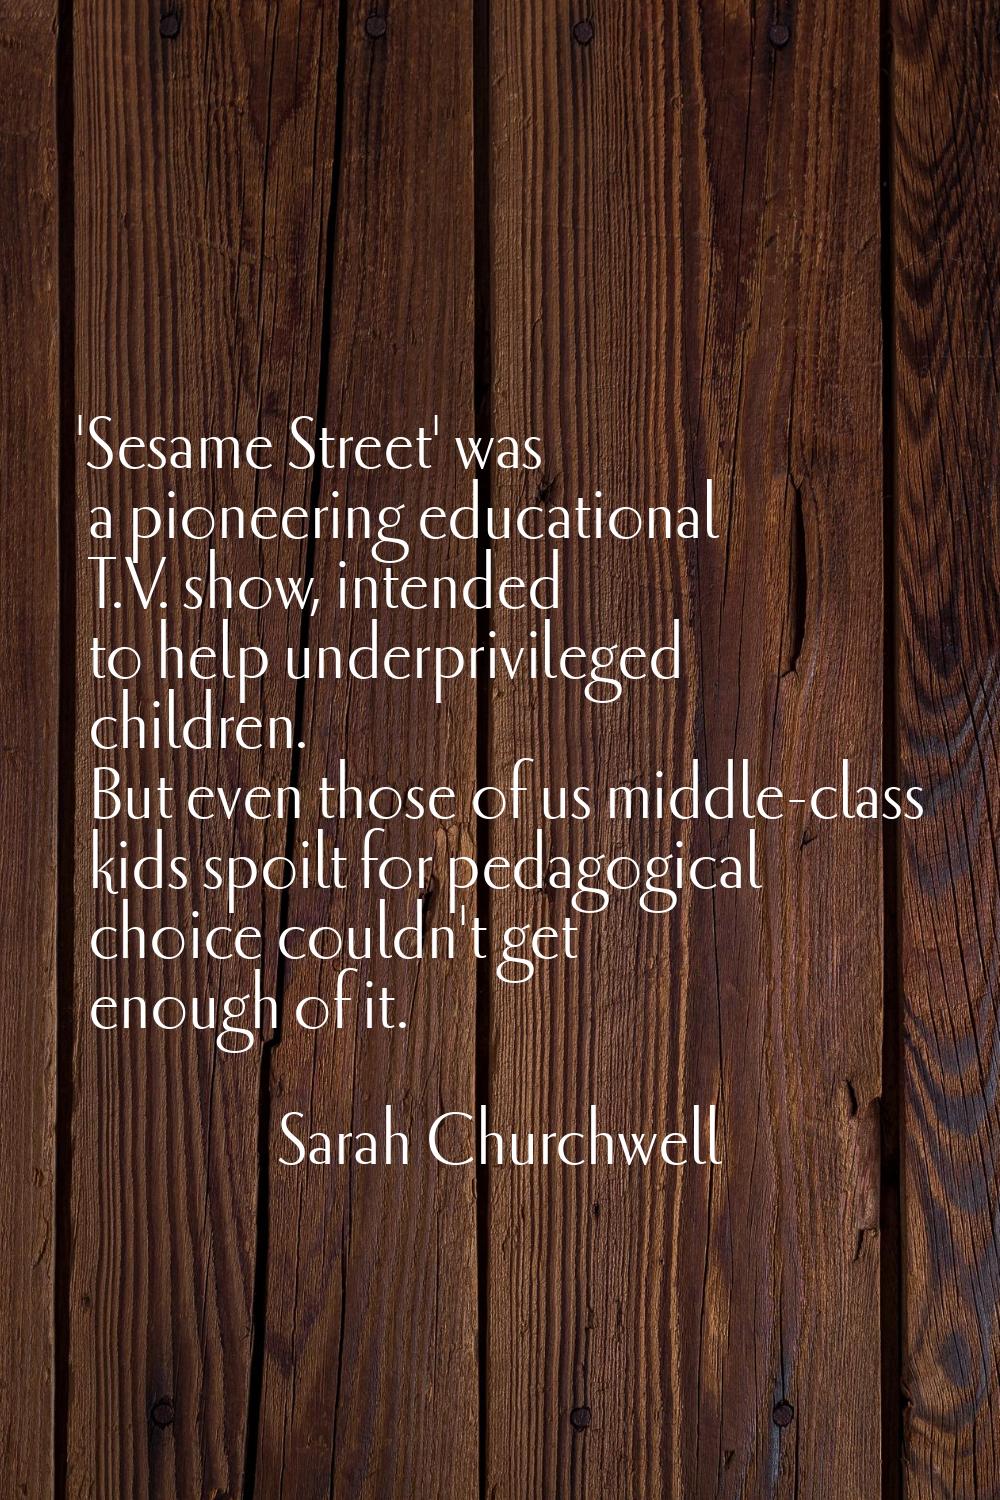 'Sesame Street' was a pioneering educational T.V. show, intended to help underprivileged children. 